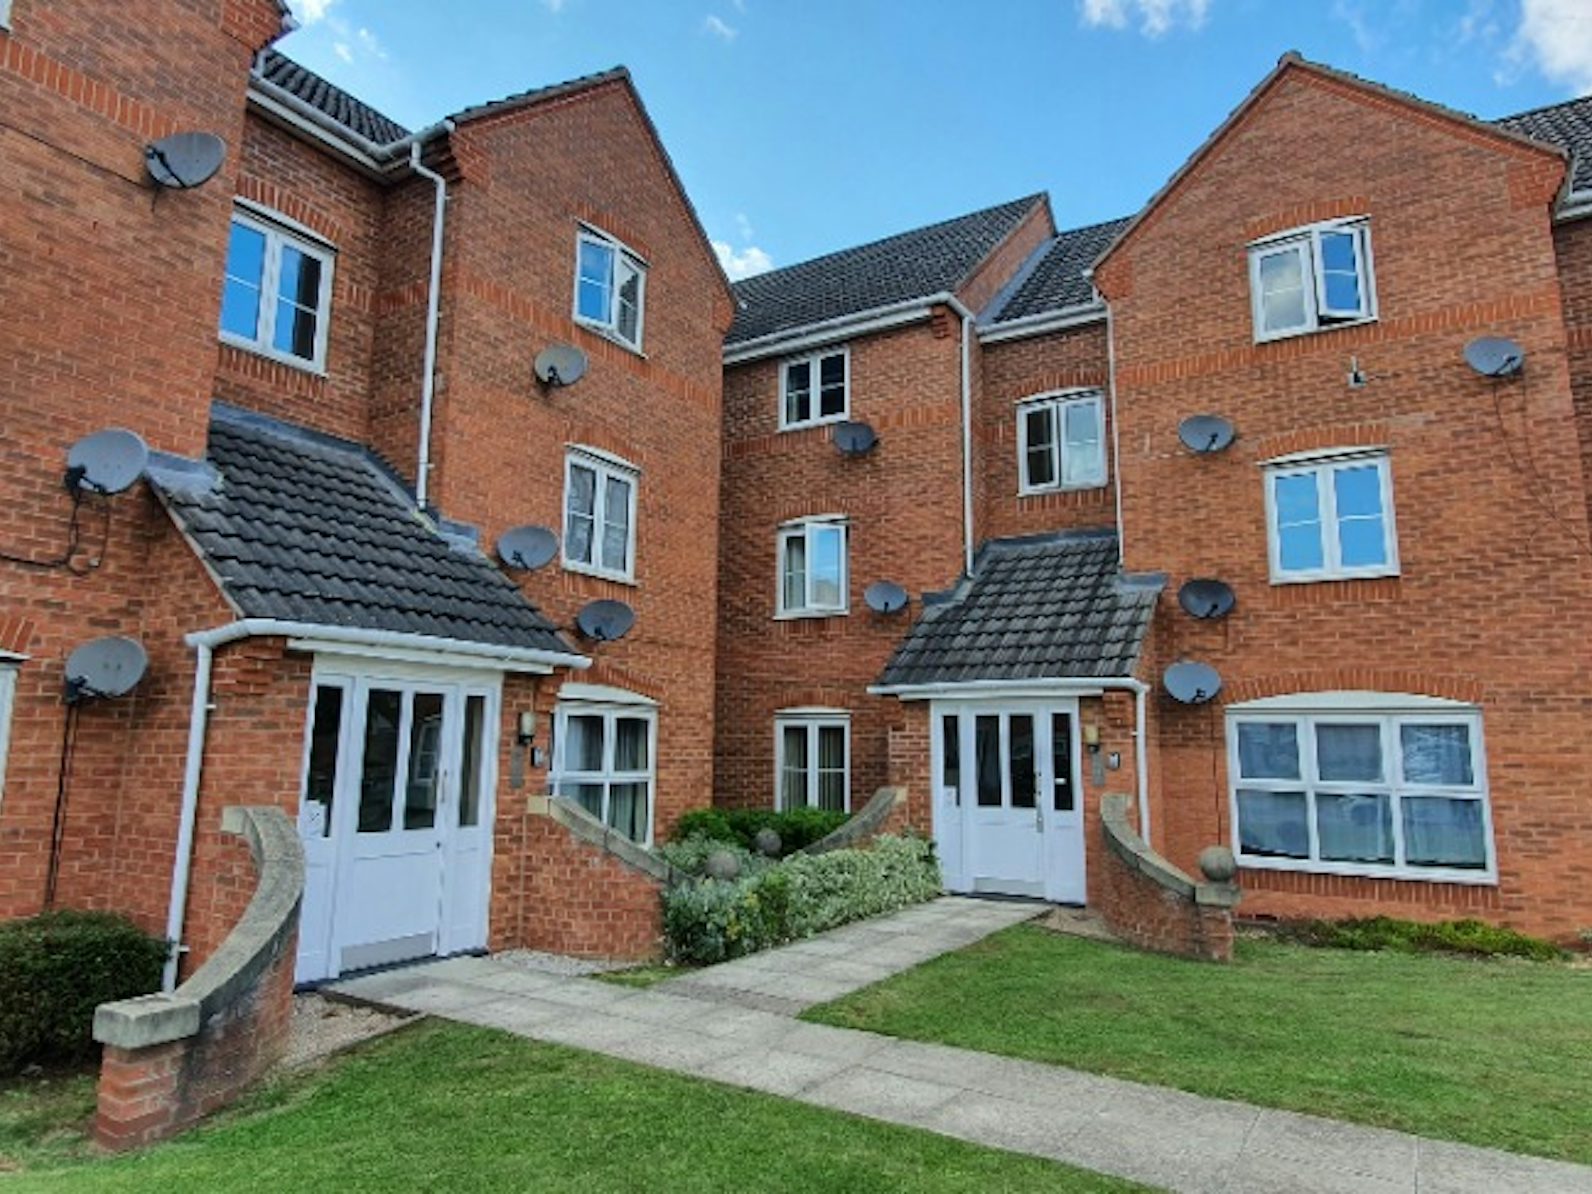 Flat to rent on Firedrake Croft Coventry, CV1